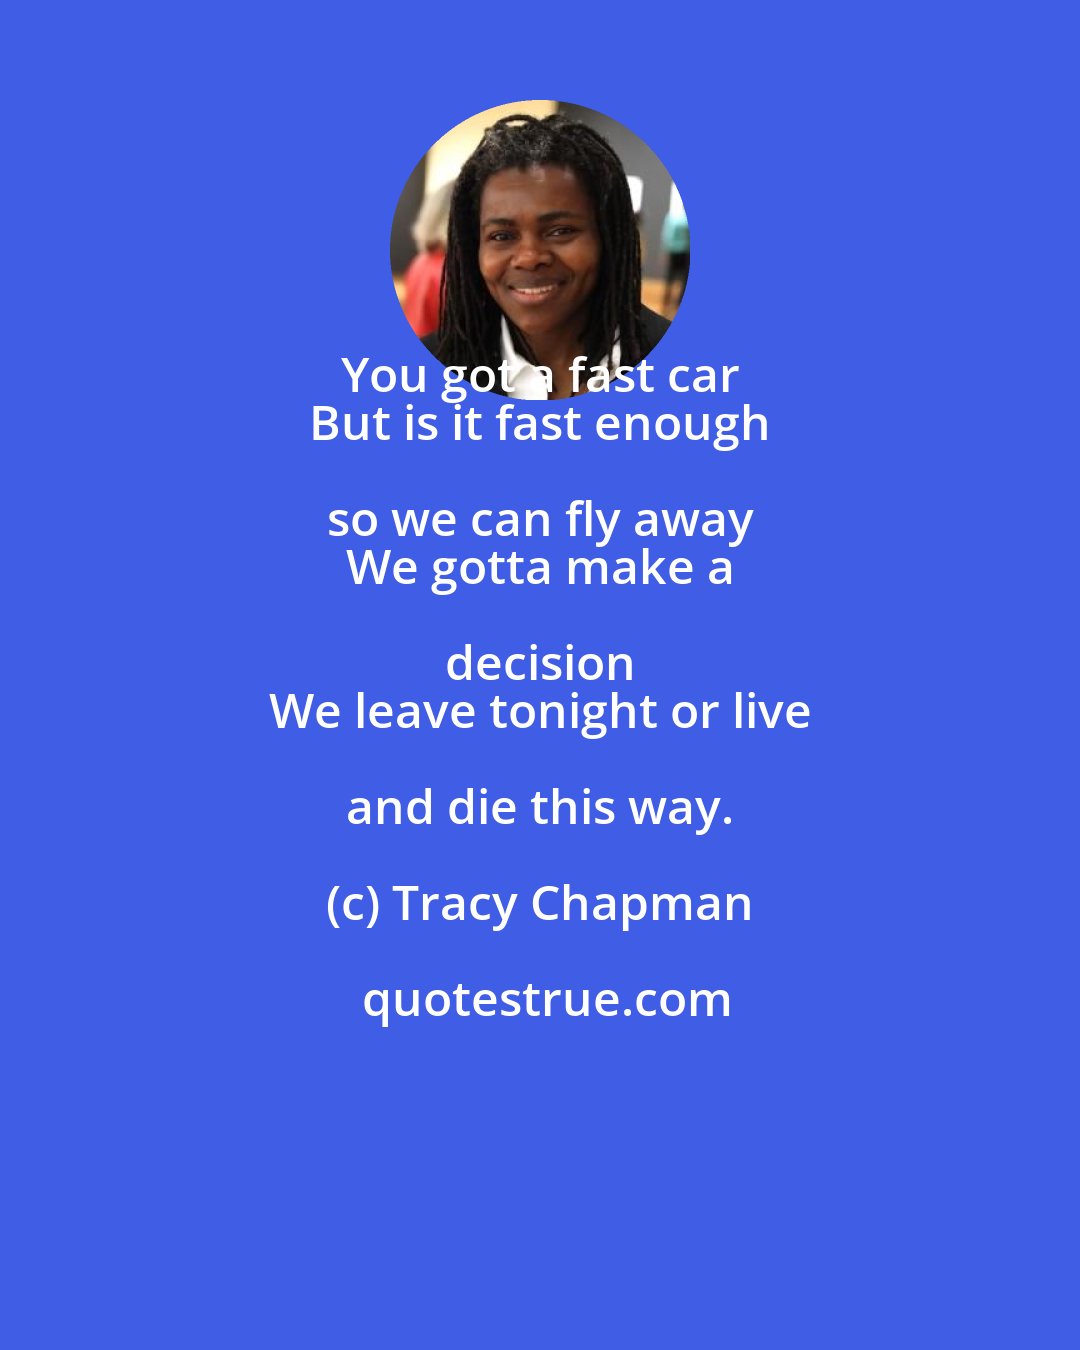 Tracy Chapman: You got a fast car 
 But is it fast enough so we can fly away 
 We gotta make a decision 
 We leave tonight or live and die this way.